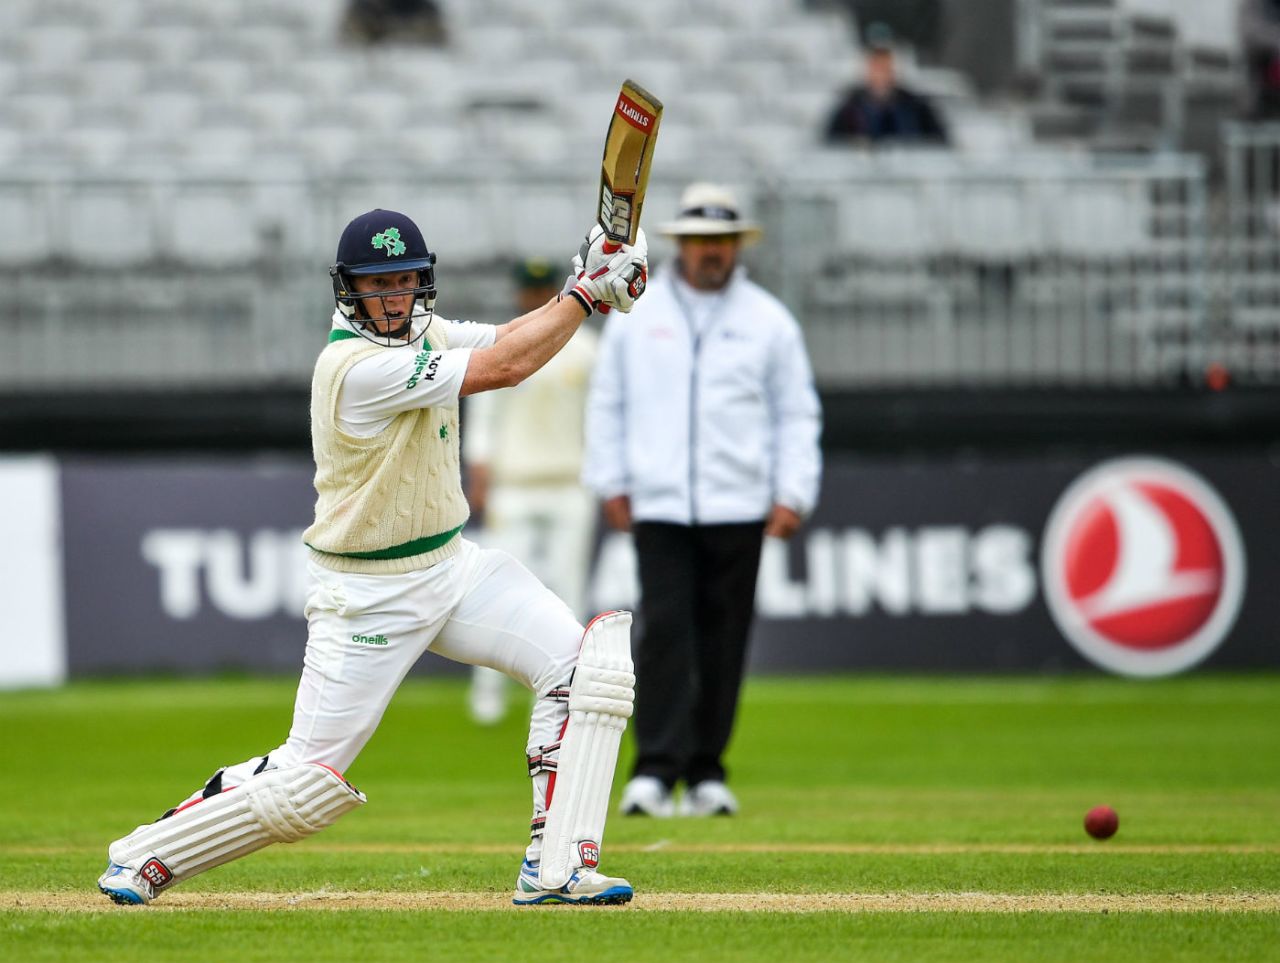 Kevin O'Brien scored Ireland's maiden Test fifty, Ireland v Pakistan, Only Test, Malahide, 4th day, May 14, 2018